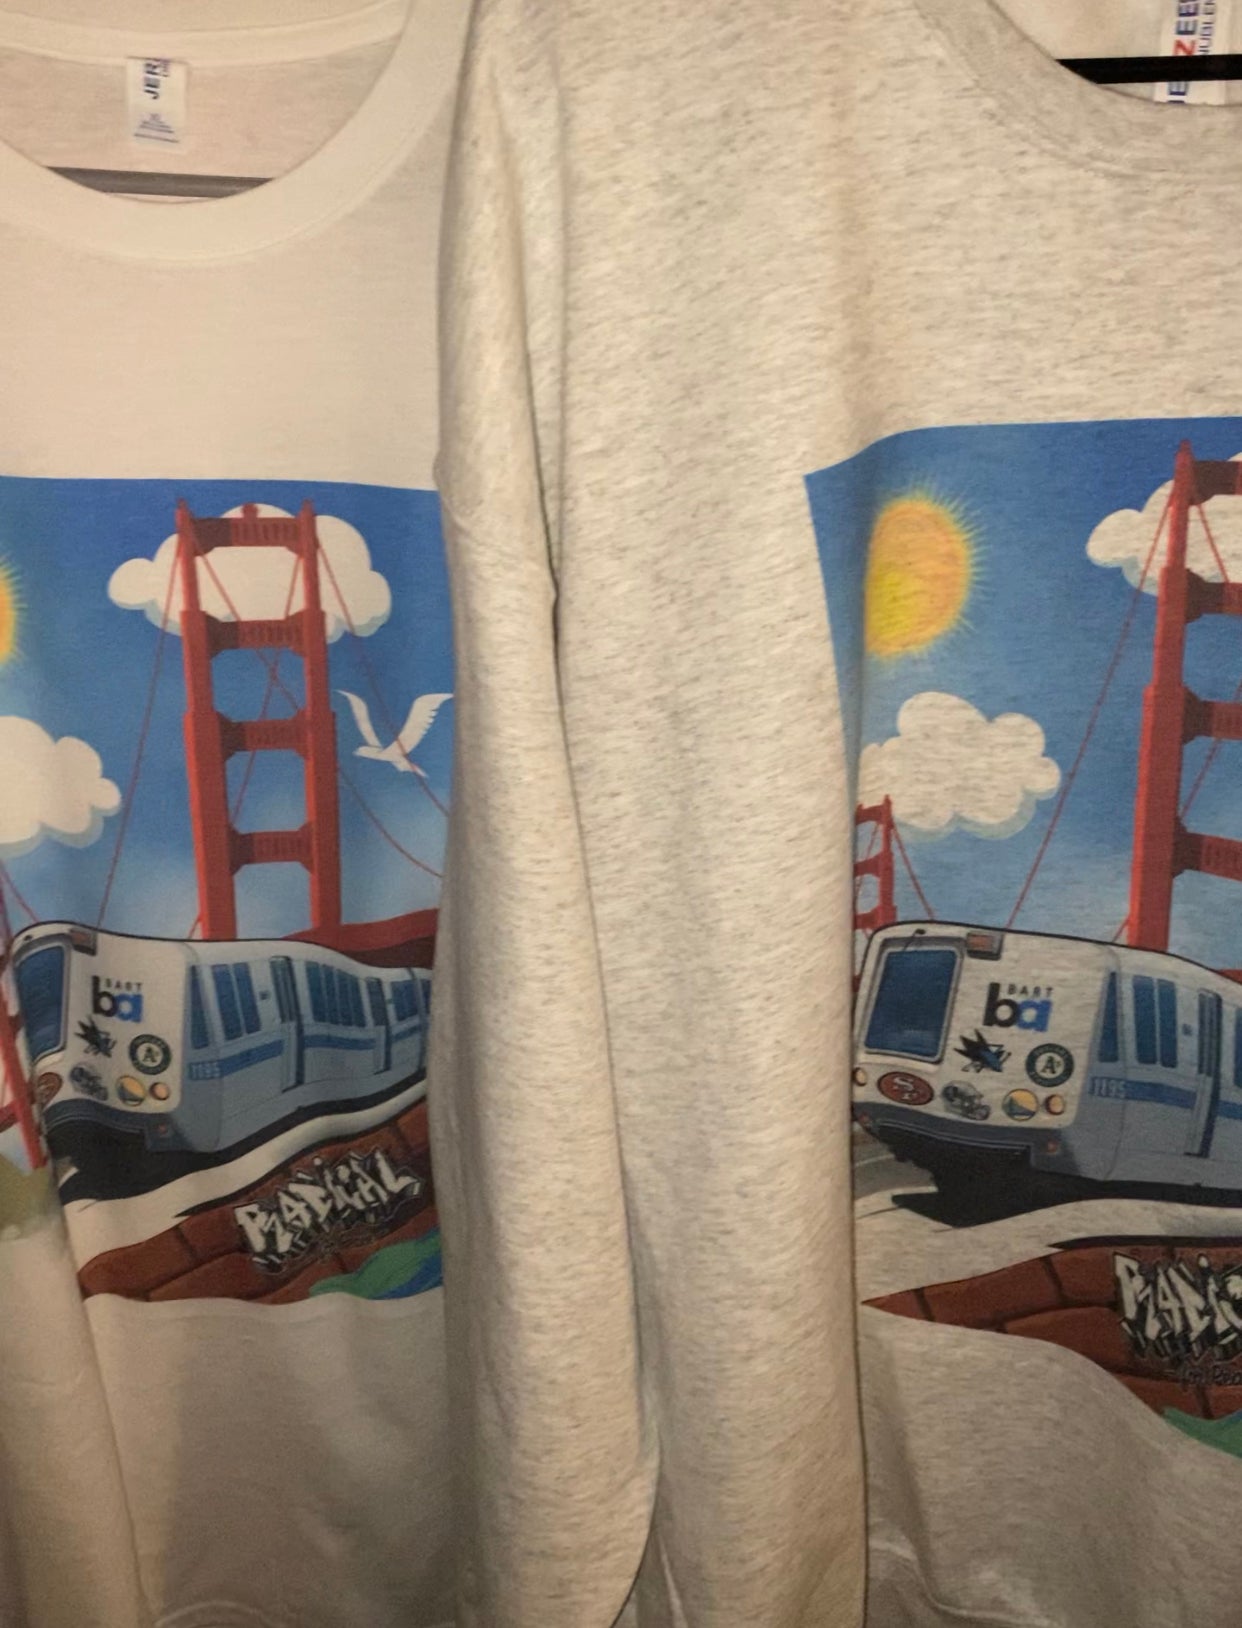 sanfranpsycho Beat La Black & Orange Tee | Urban Streetwear | Unique Graphic Tees | San Francisco Brand | High Quality T-shirts | Outer Sunset Surf Inspired | San